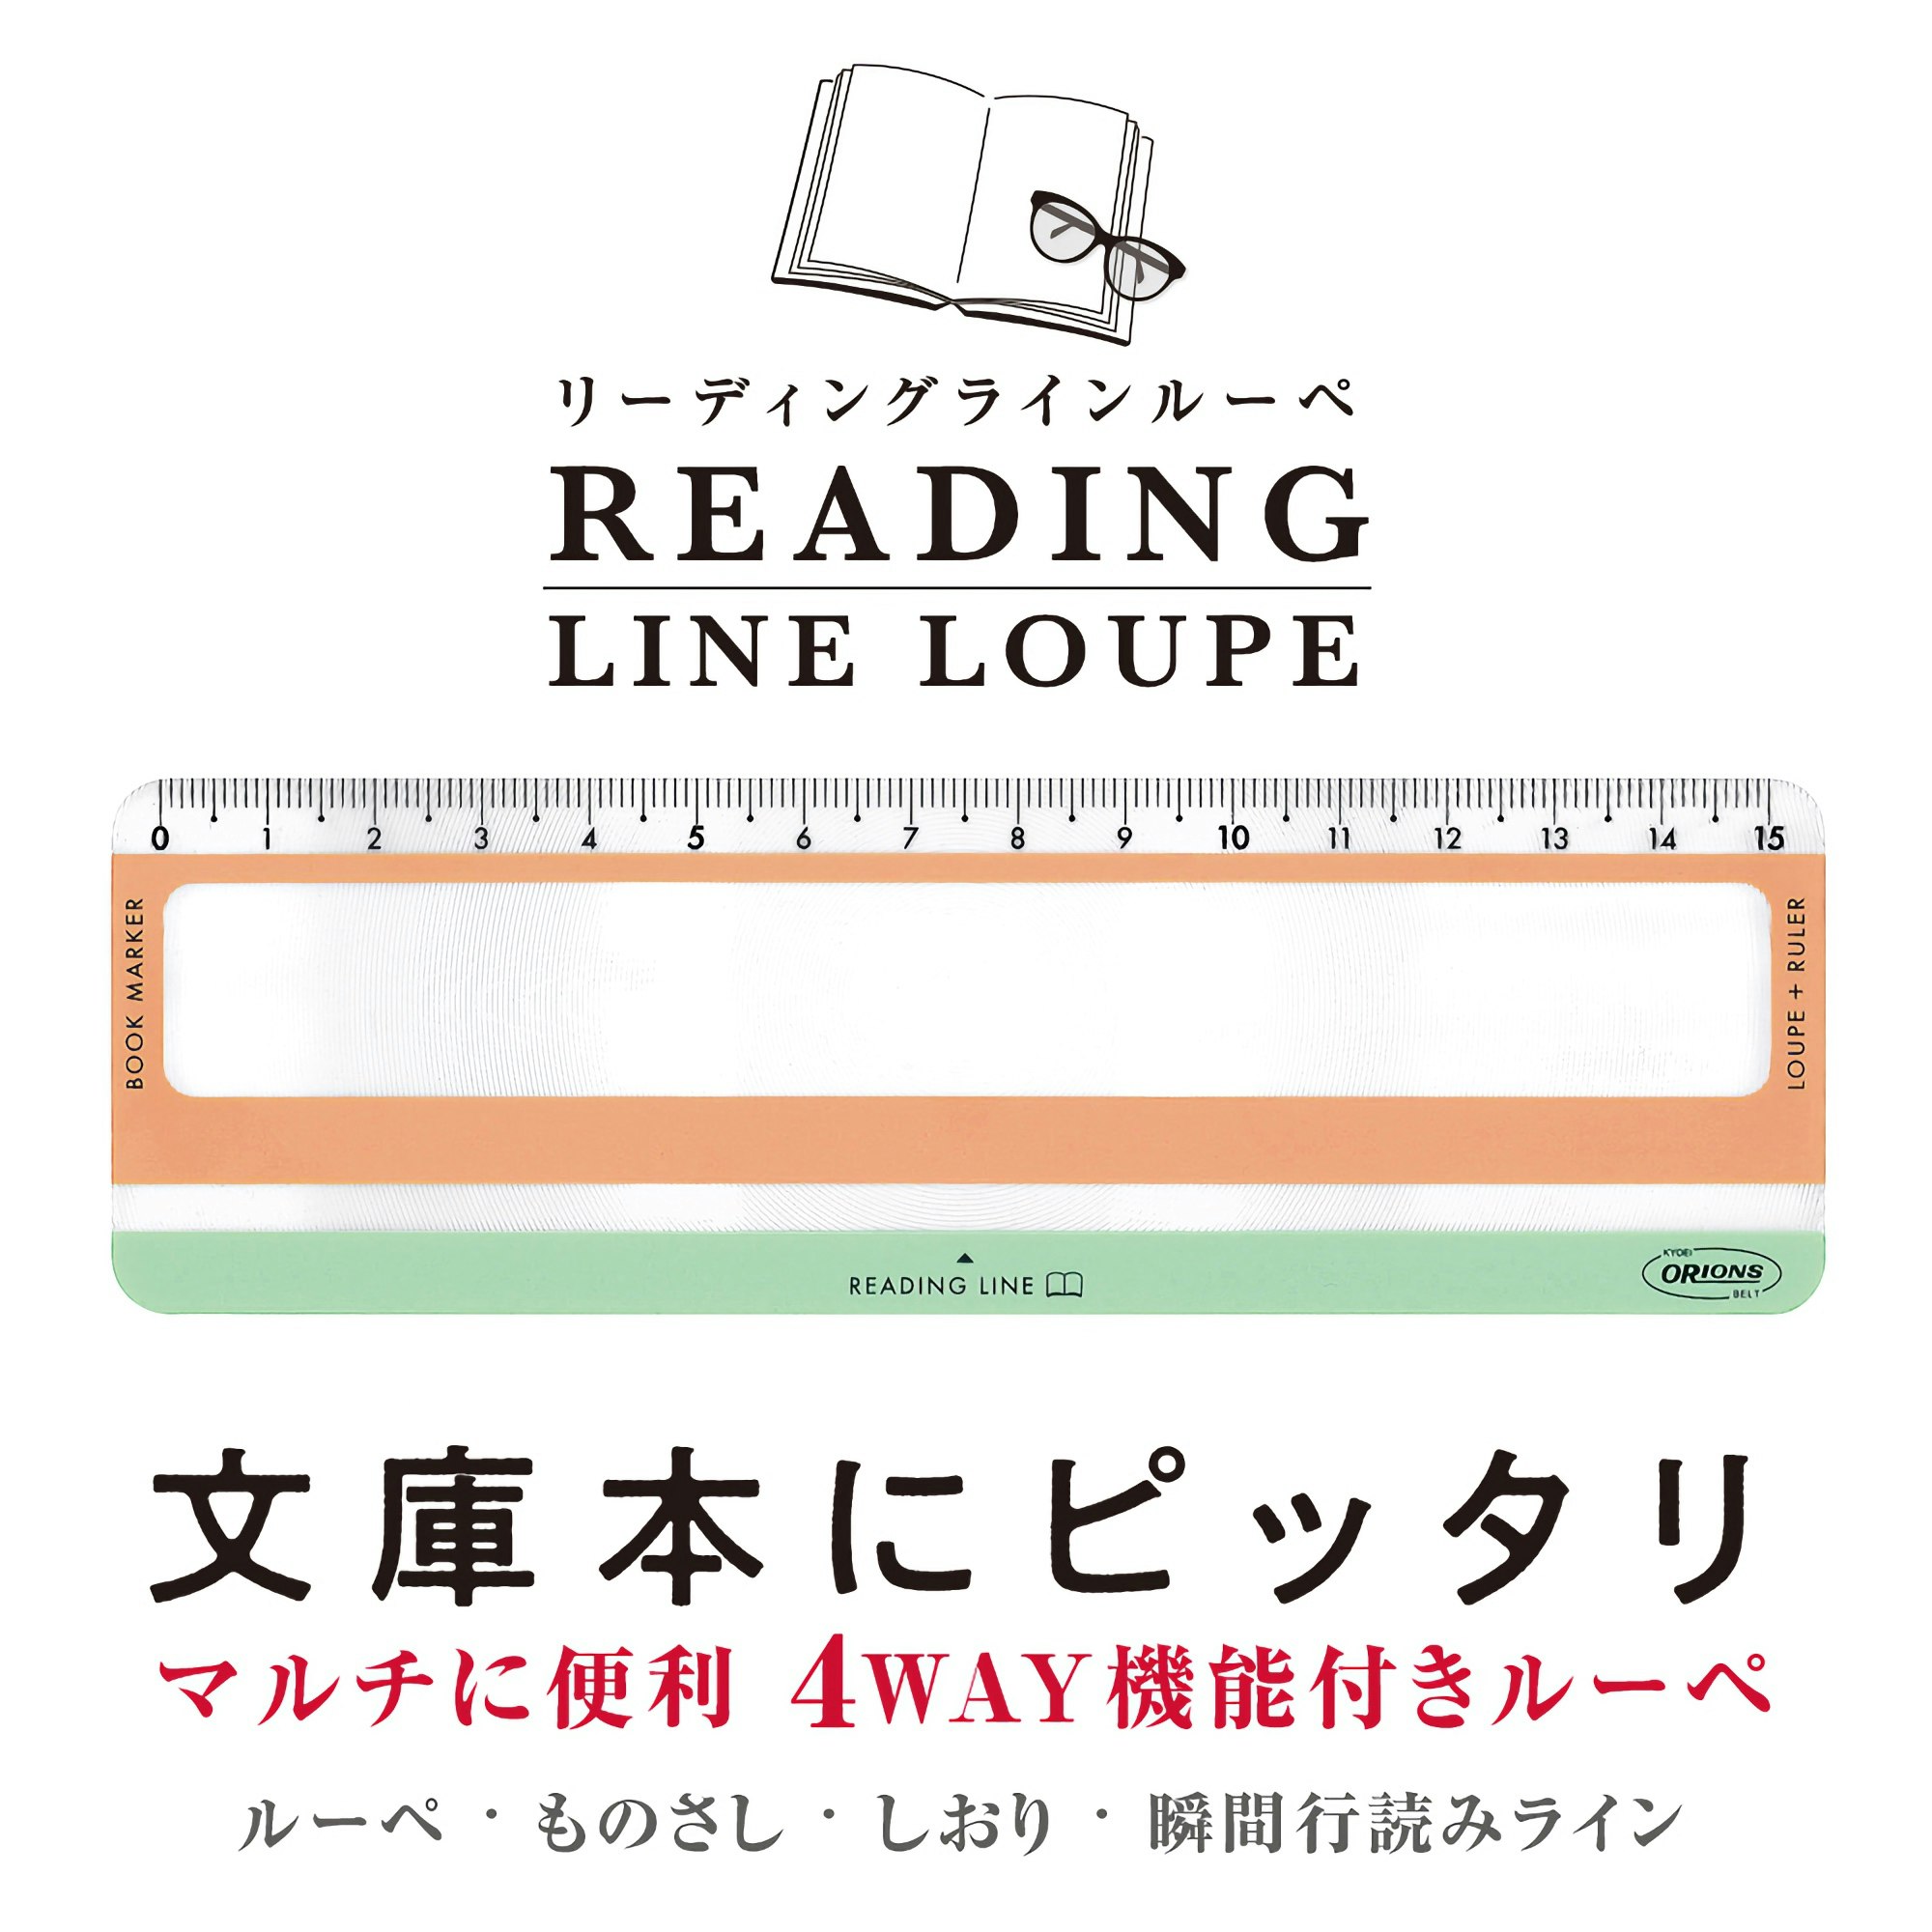 Kyoei Orions Reading Line Loupe Apricot & Ice Green